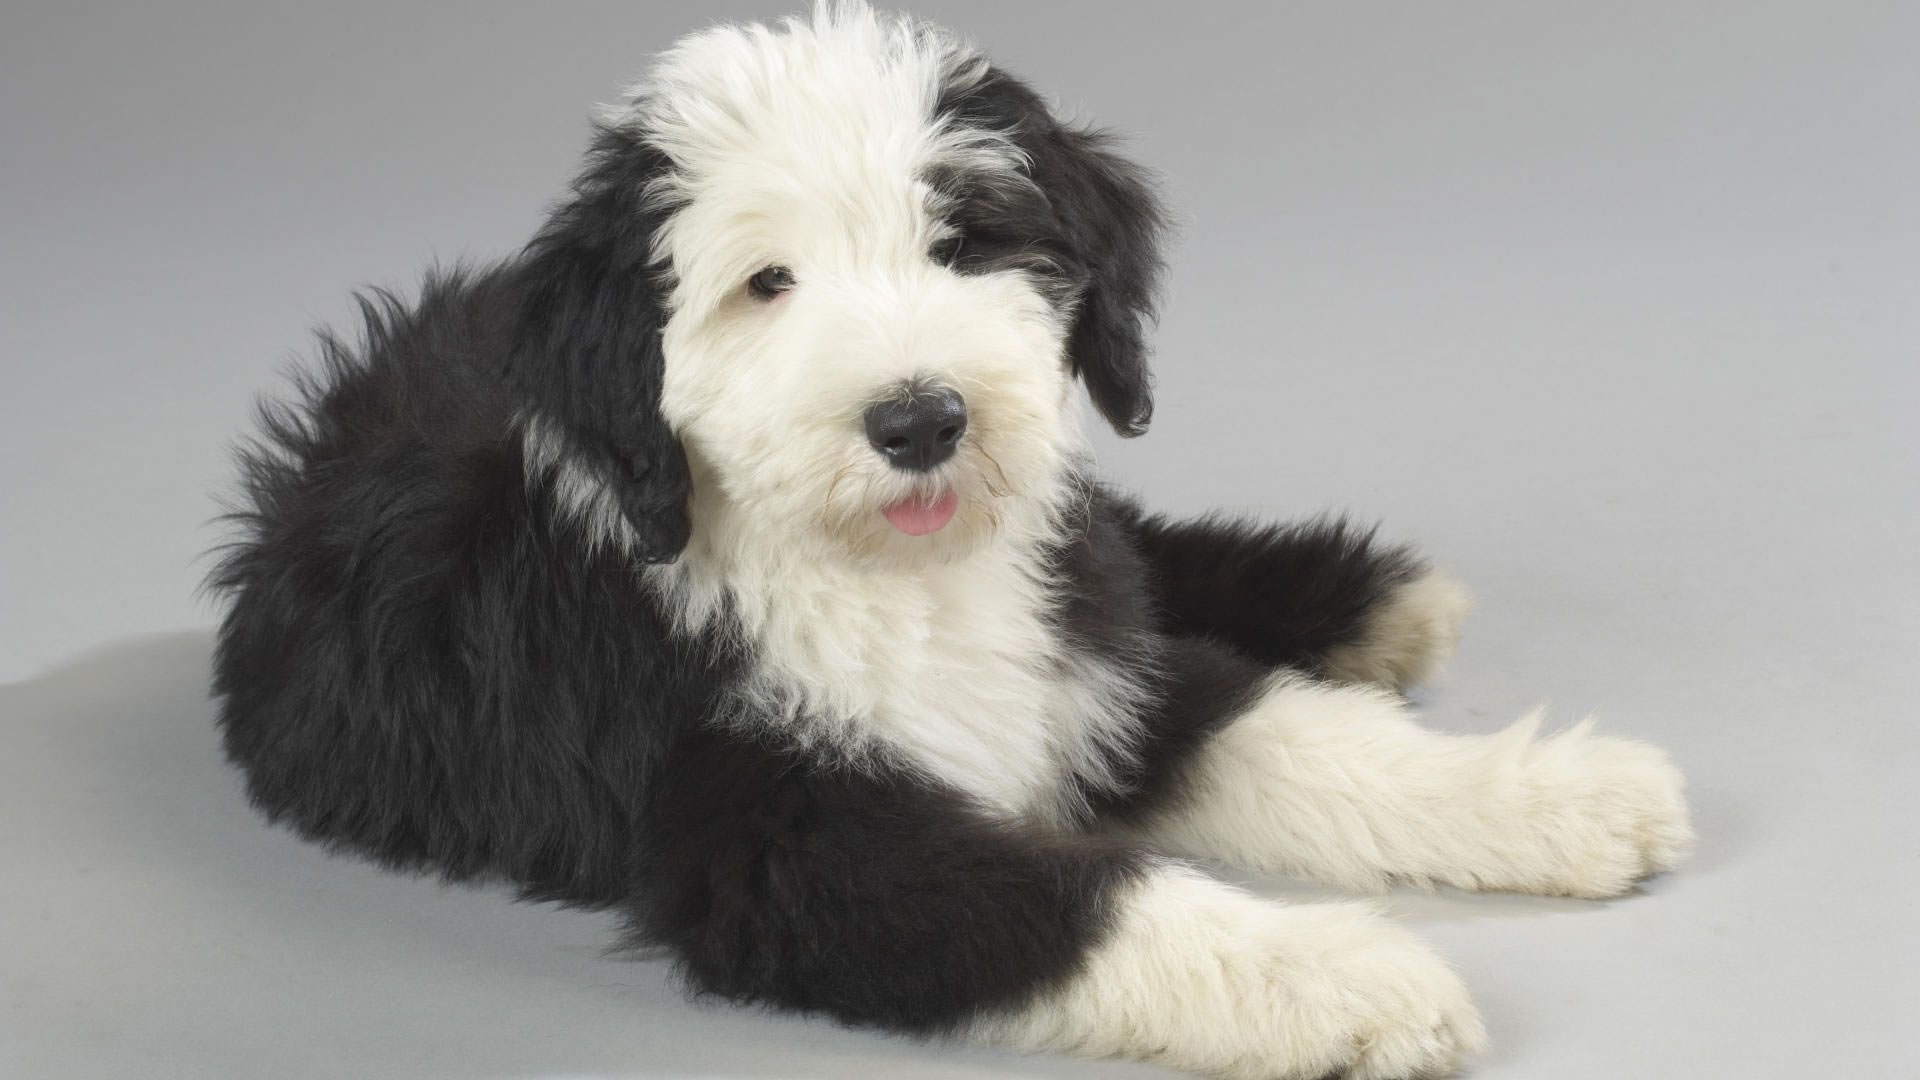 Two Old English Sheepdogs Wallpaper - My Doggy Rocks